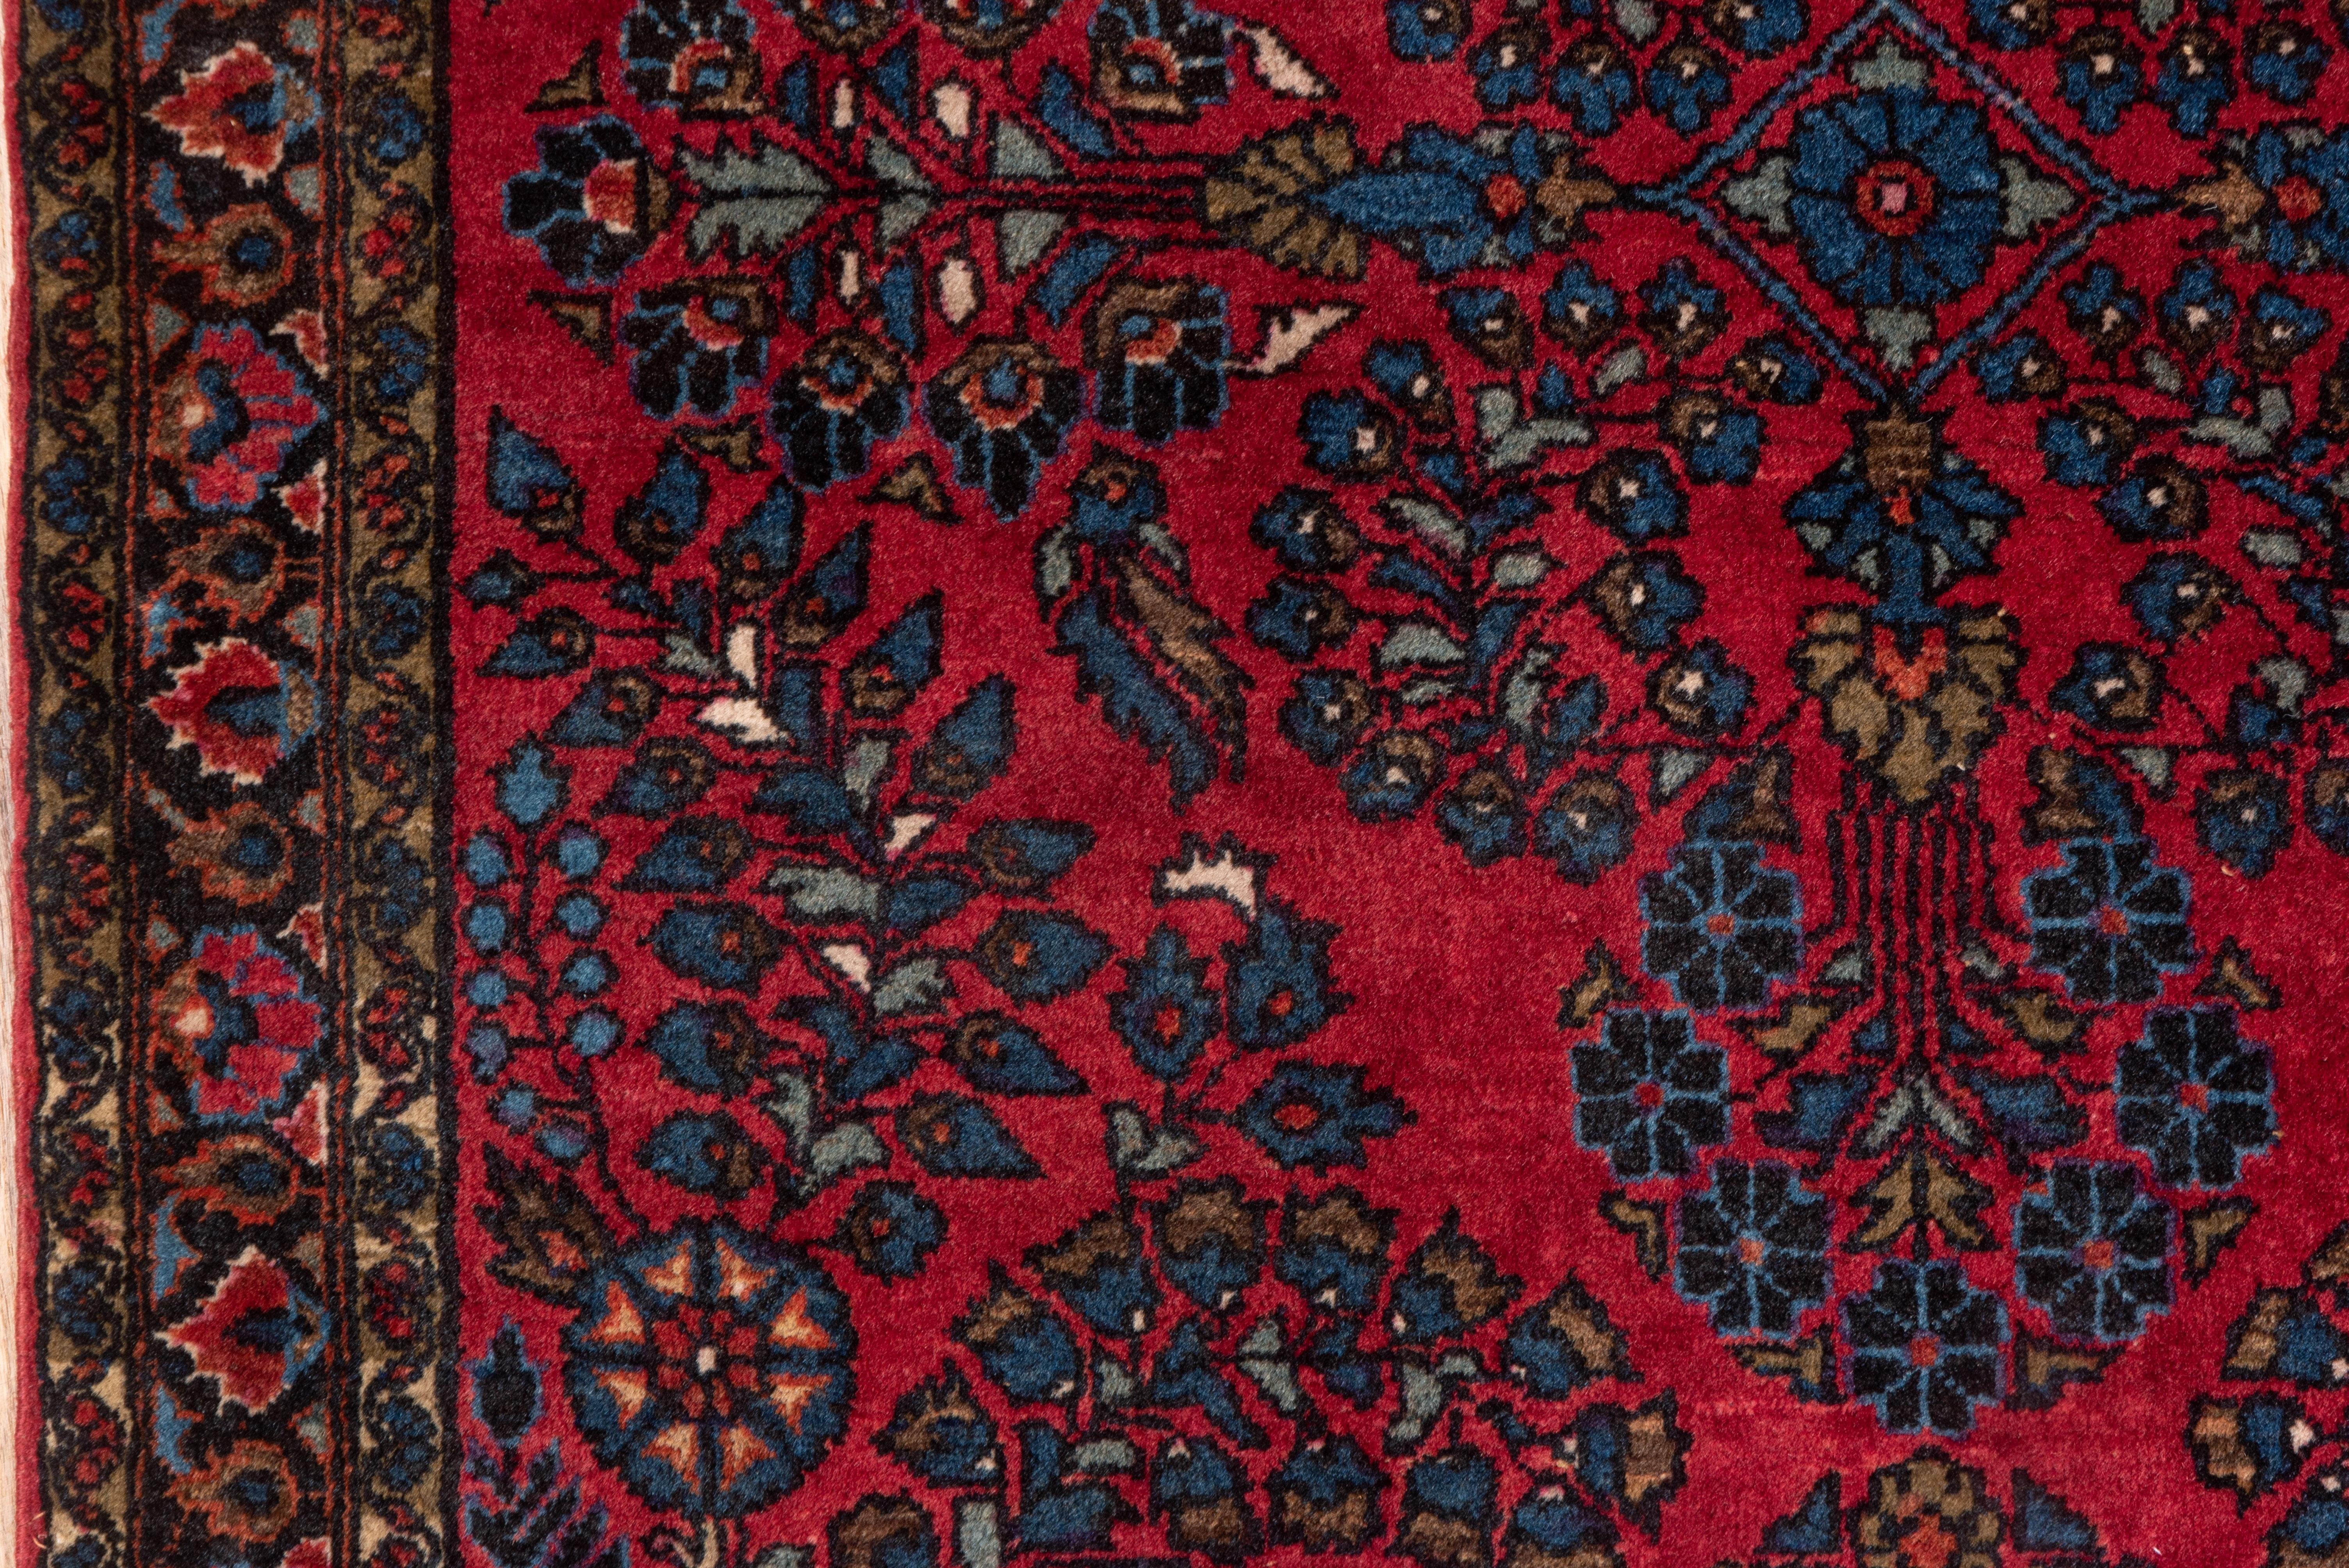 Wool Mid-20th Century Persian Sarouk Rug, Red Field, Medium Pile, Blue Acents For Sale